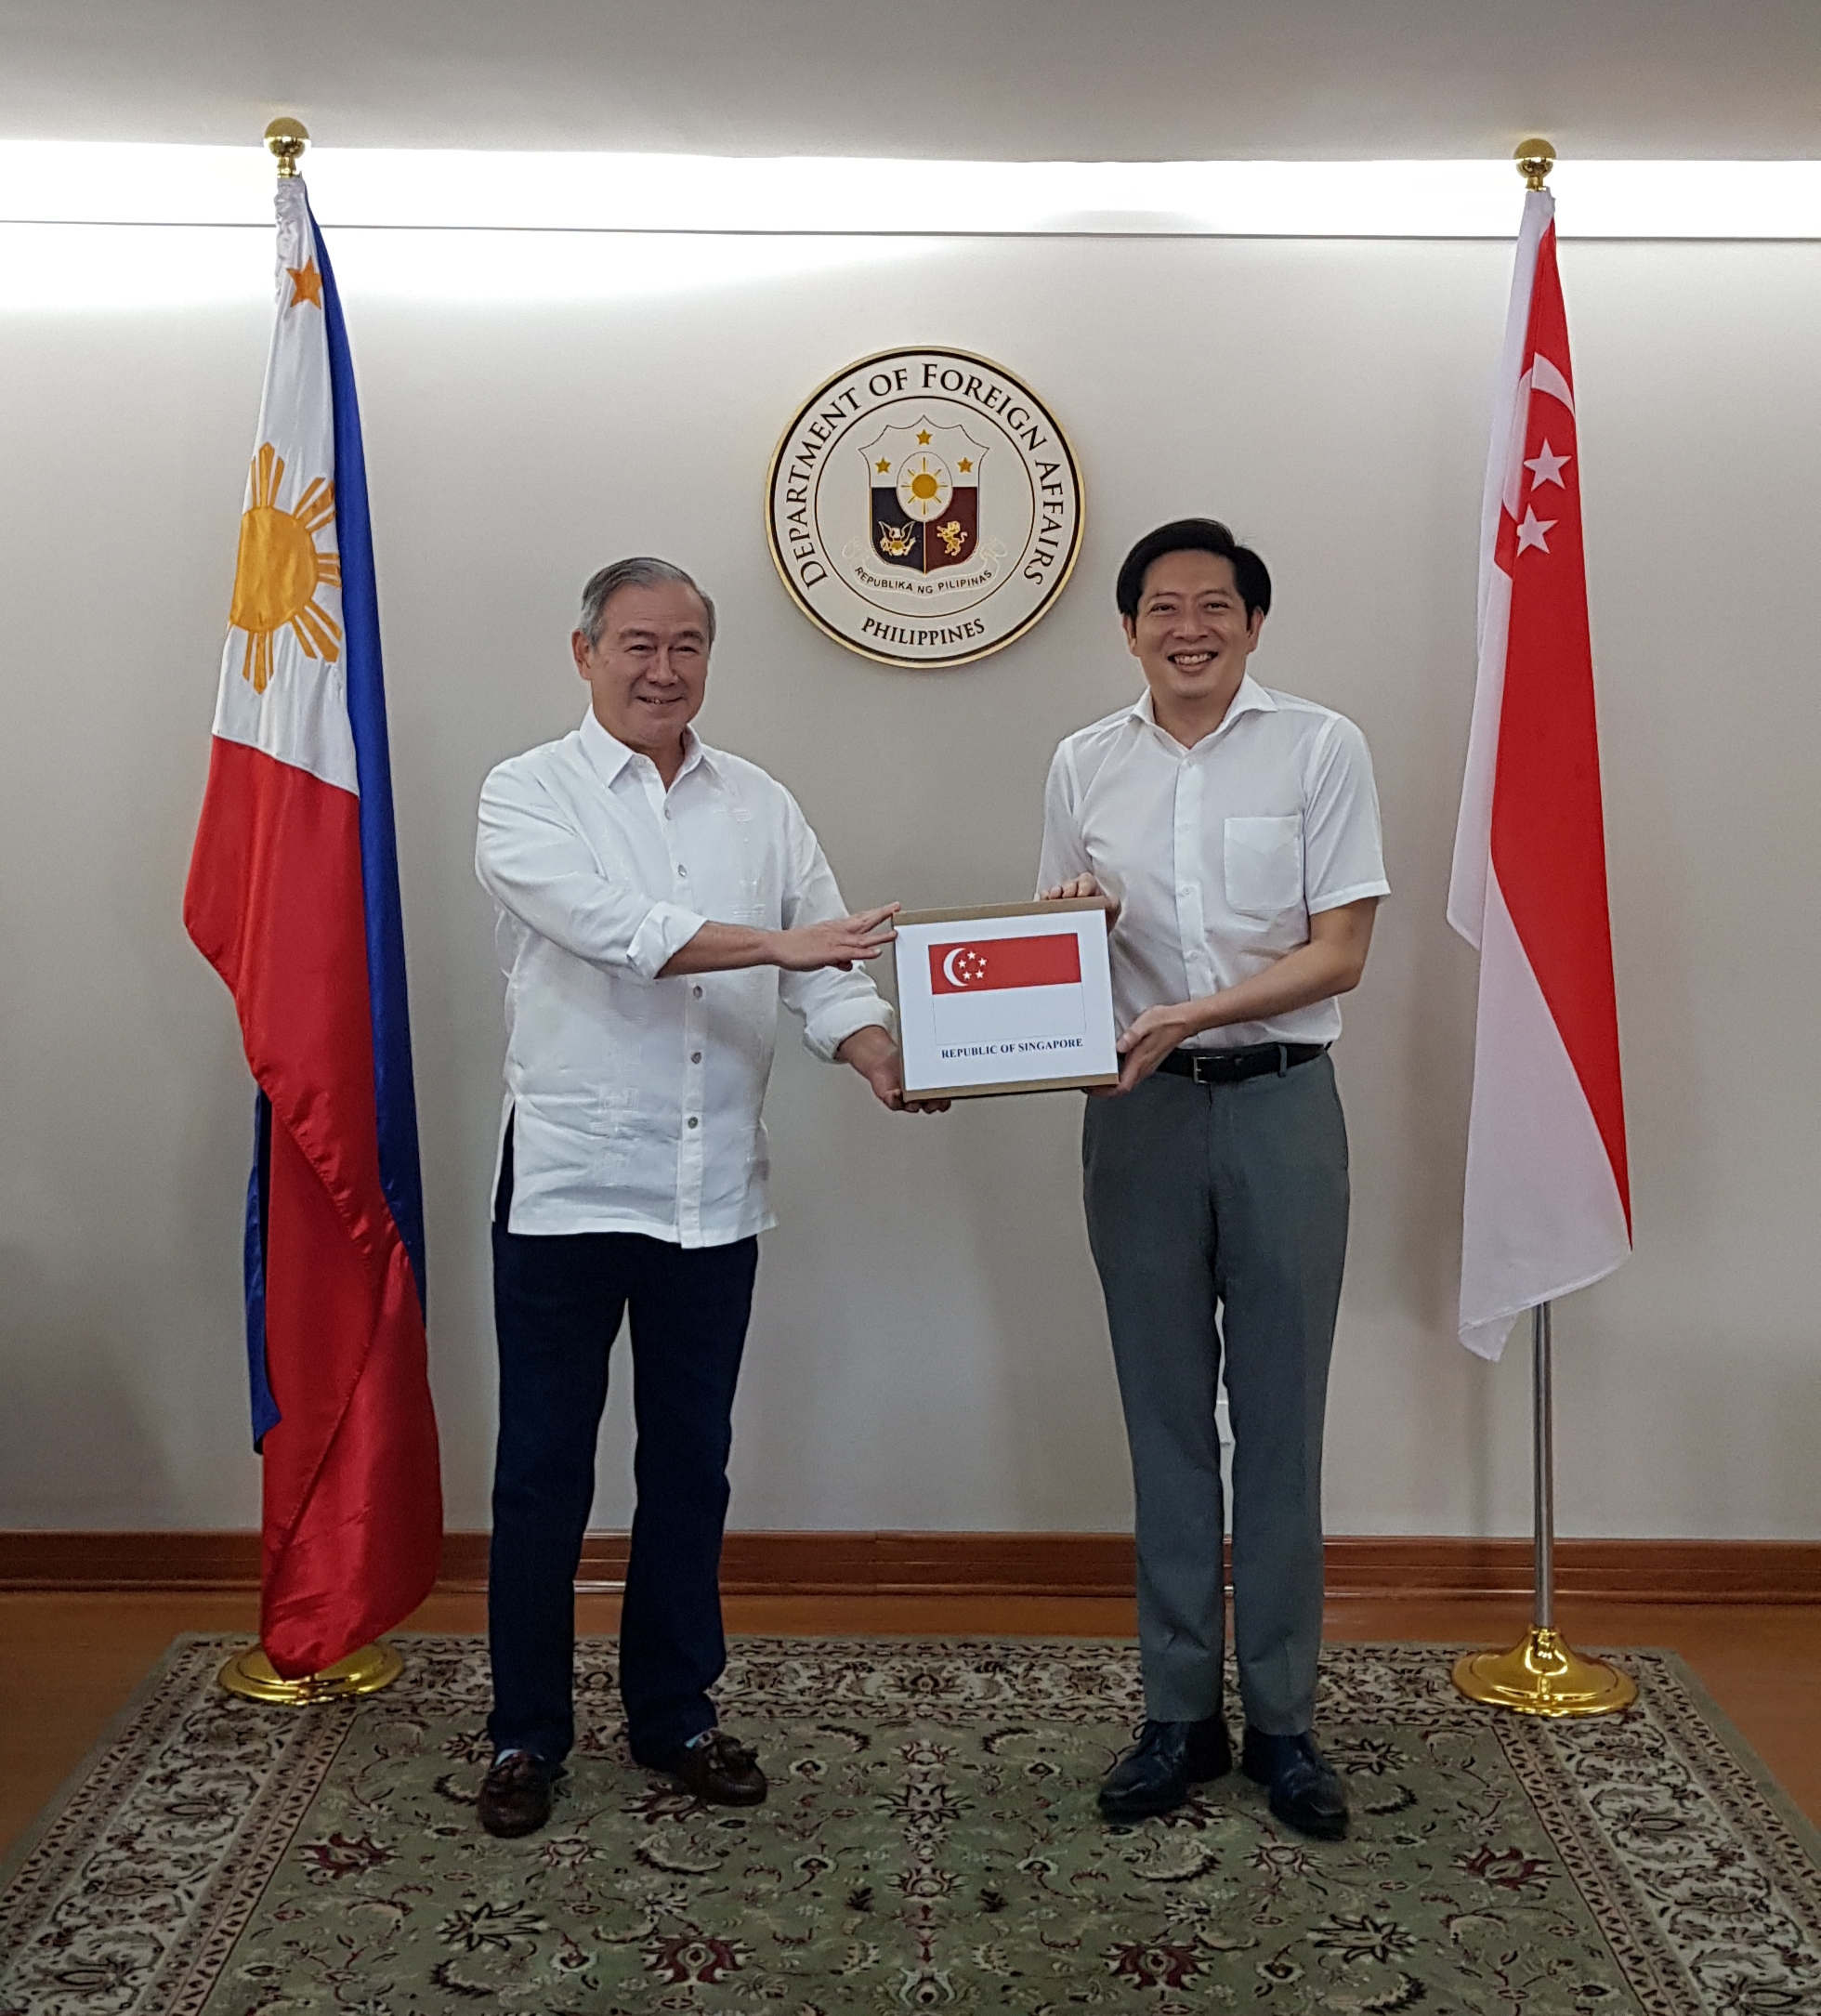 Singapore Ambassador to the Philippines Gerard Ho (right) handing over the COVID-19 diagnostic tests from Singapore to Philippine Secretary of Foreign Affairs Teodoro L Locsin Jr. (left).